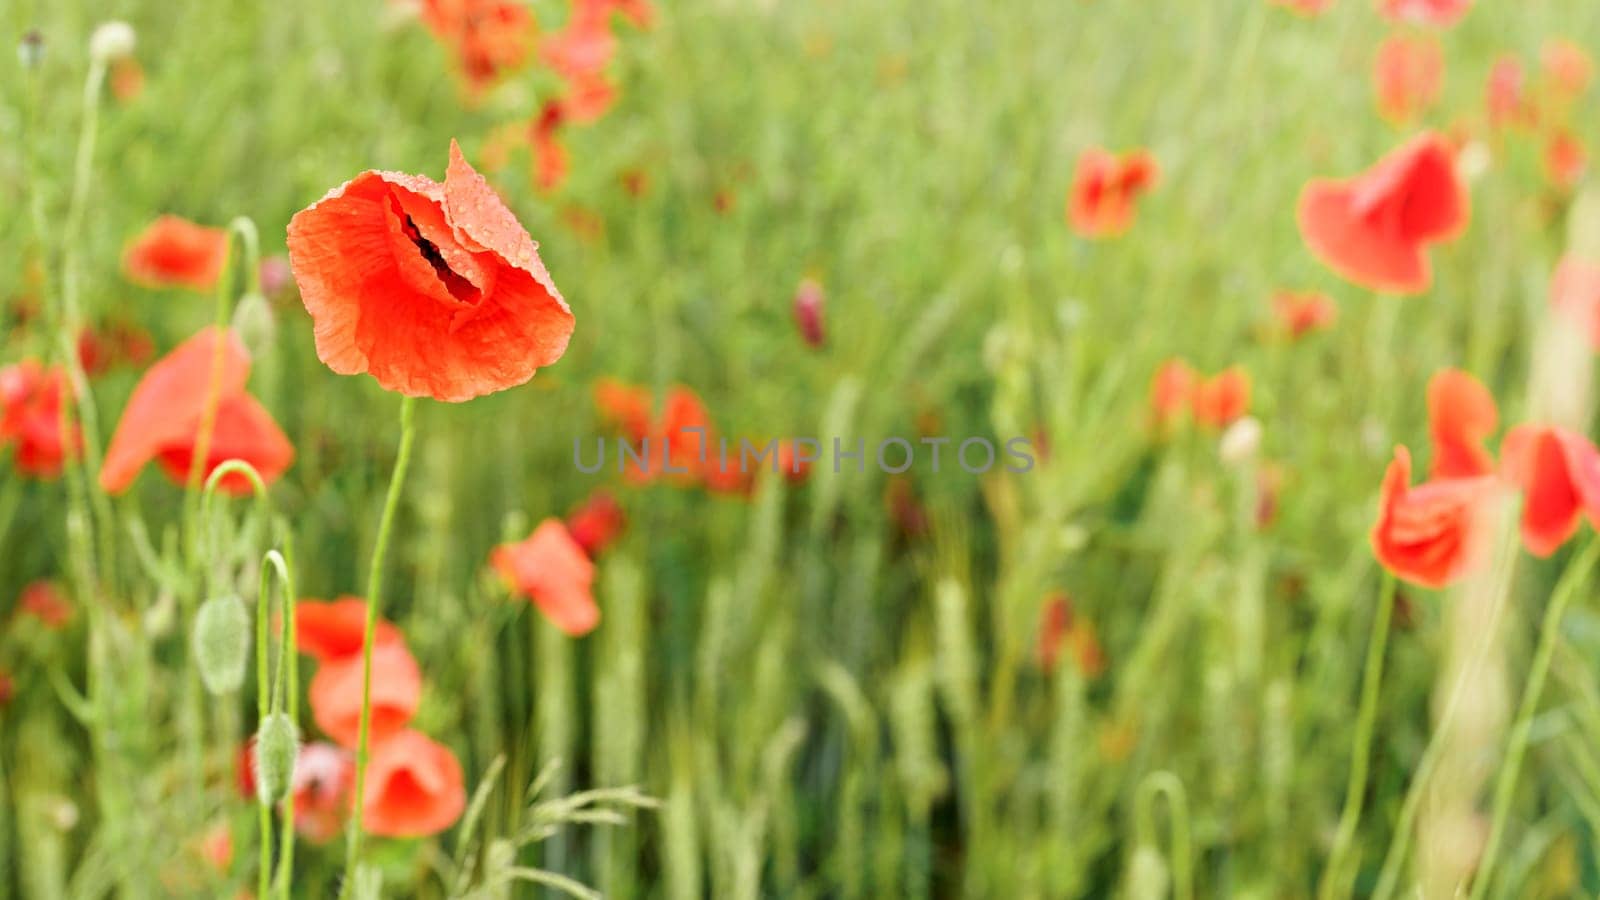 Bright red poppies, drops of rain on flower petals, growing in field of green unripe wheat by Ivanko